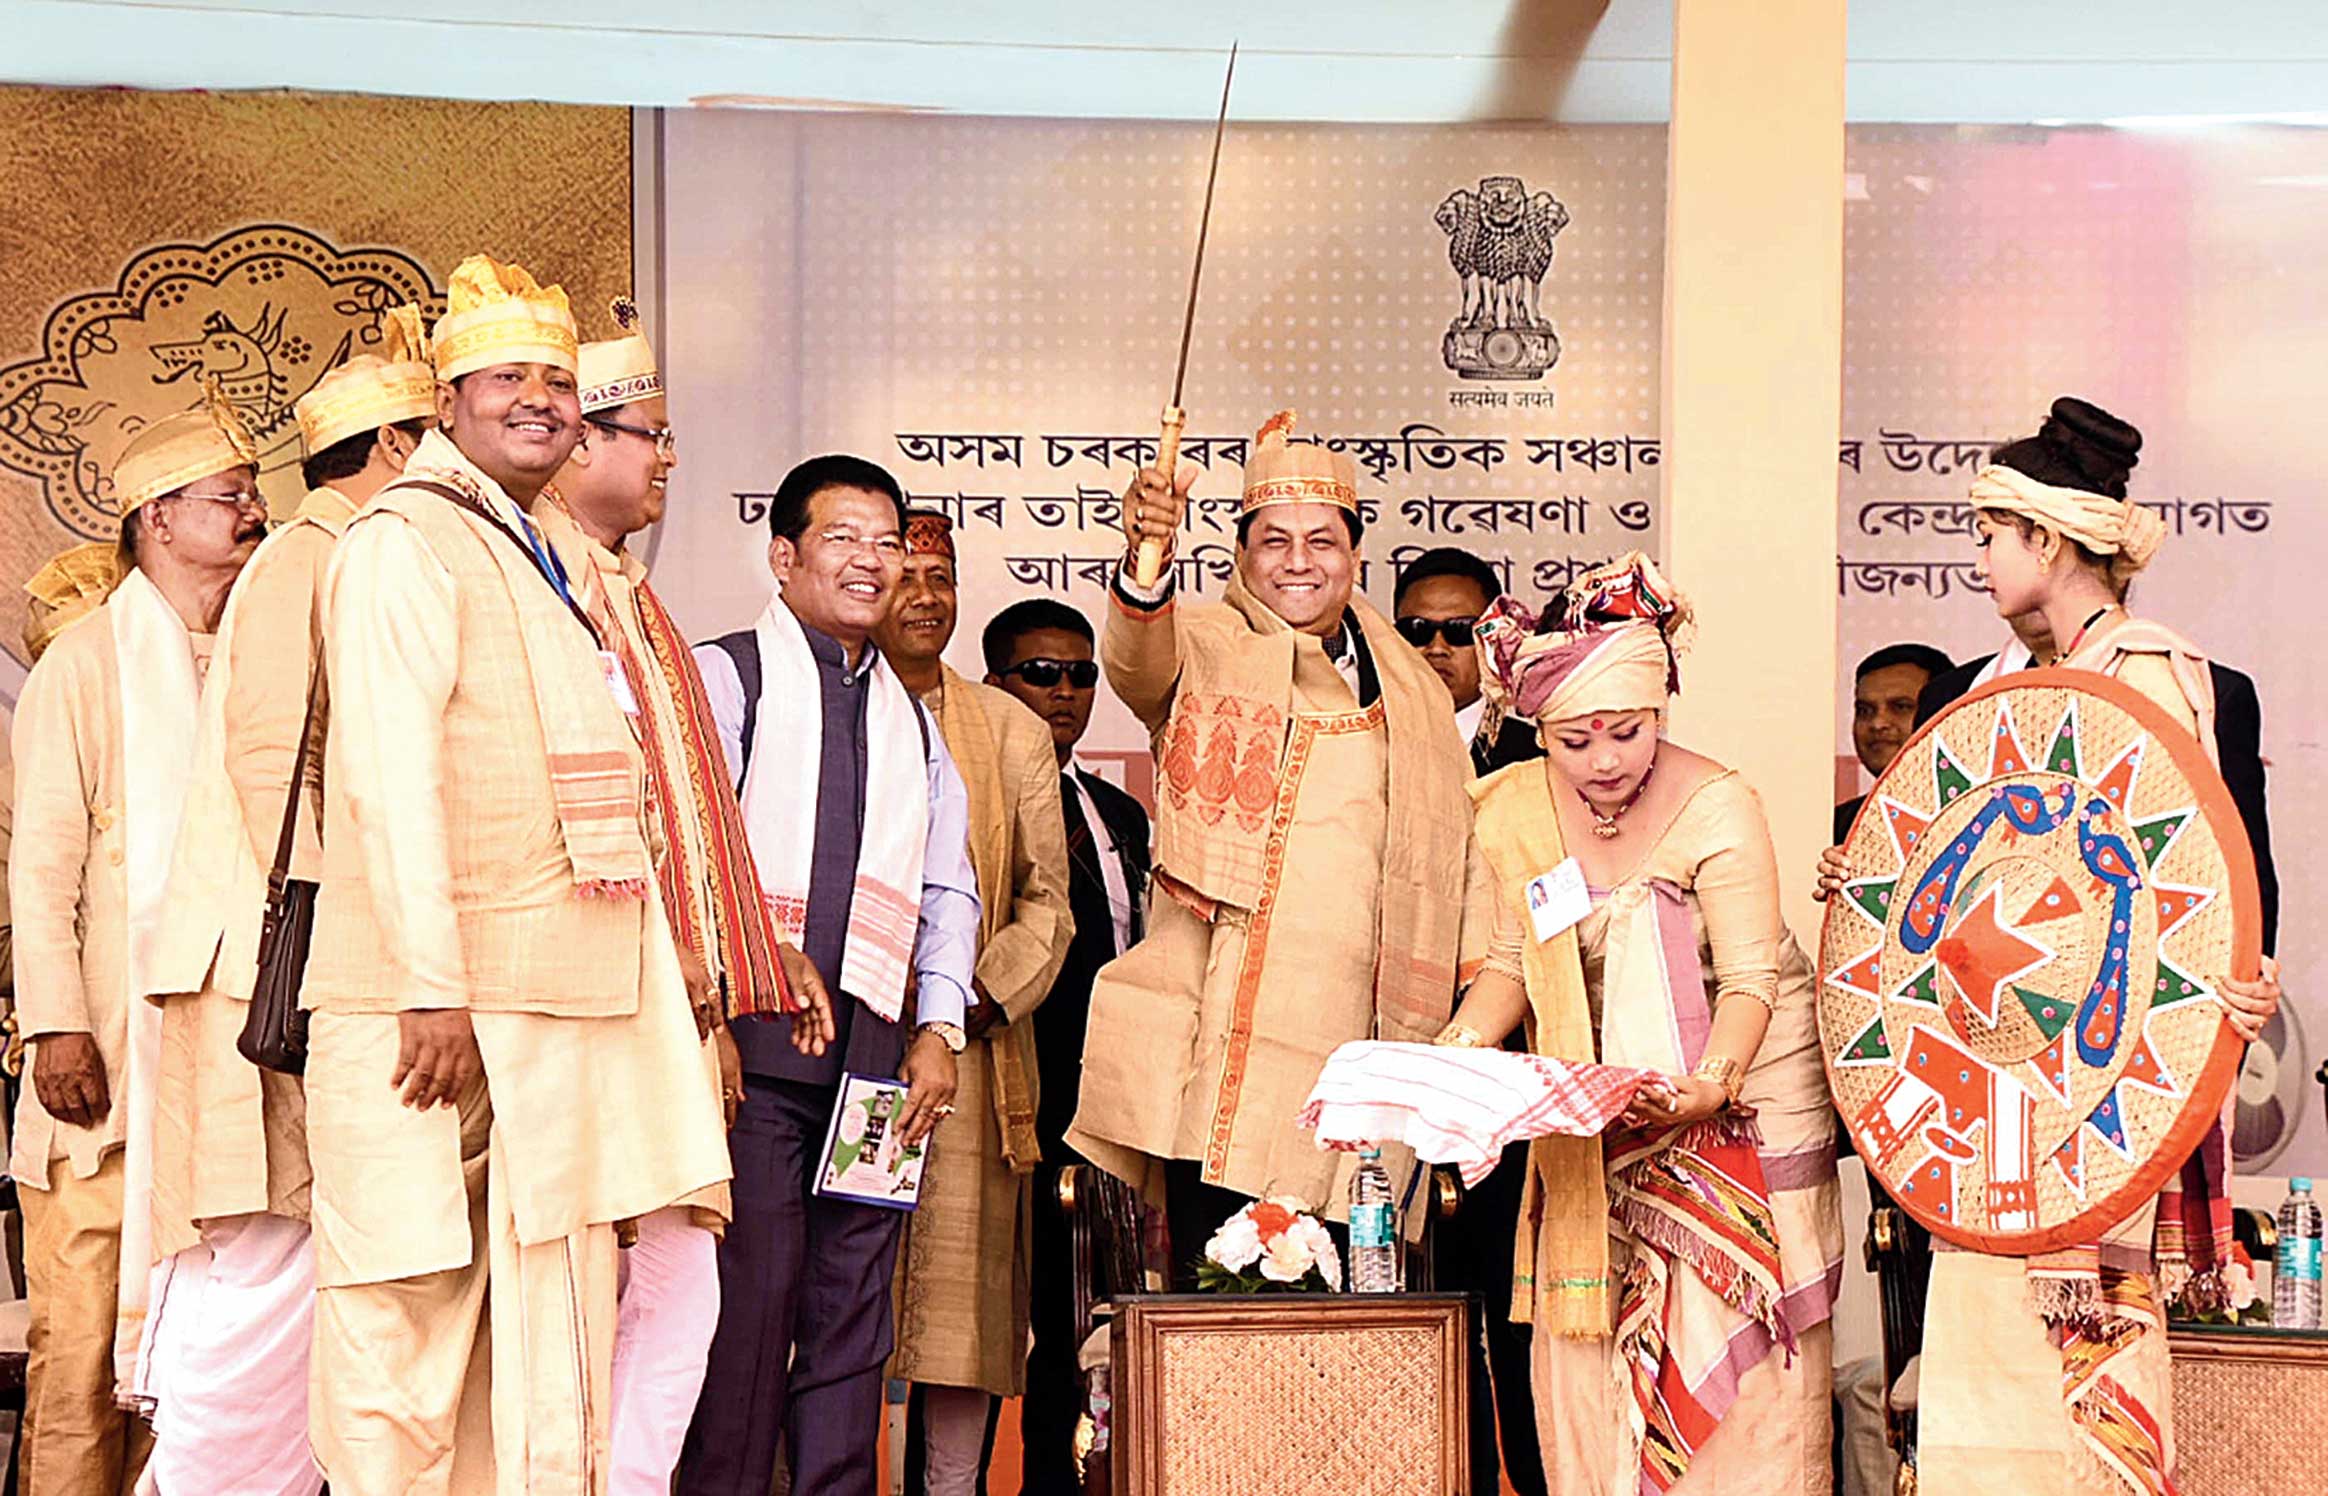 Assam chief minister Sarbananda Sonowal wields a sword at the programme at Dhakuakhana in Assam’s Lakhimpur district on Thursday. People observed Me-Dam-Me-Phi across the state for ‘unity to fight against the injustice being done through the citizenship bill’. 